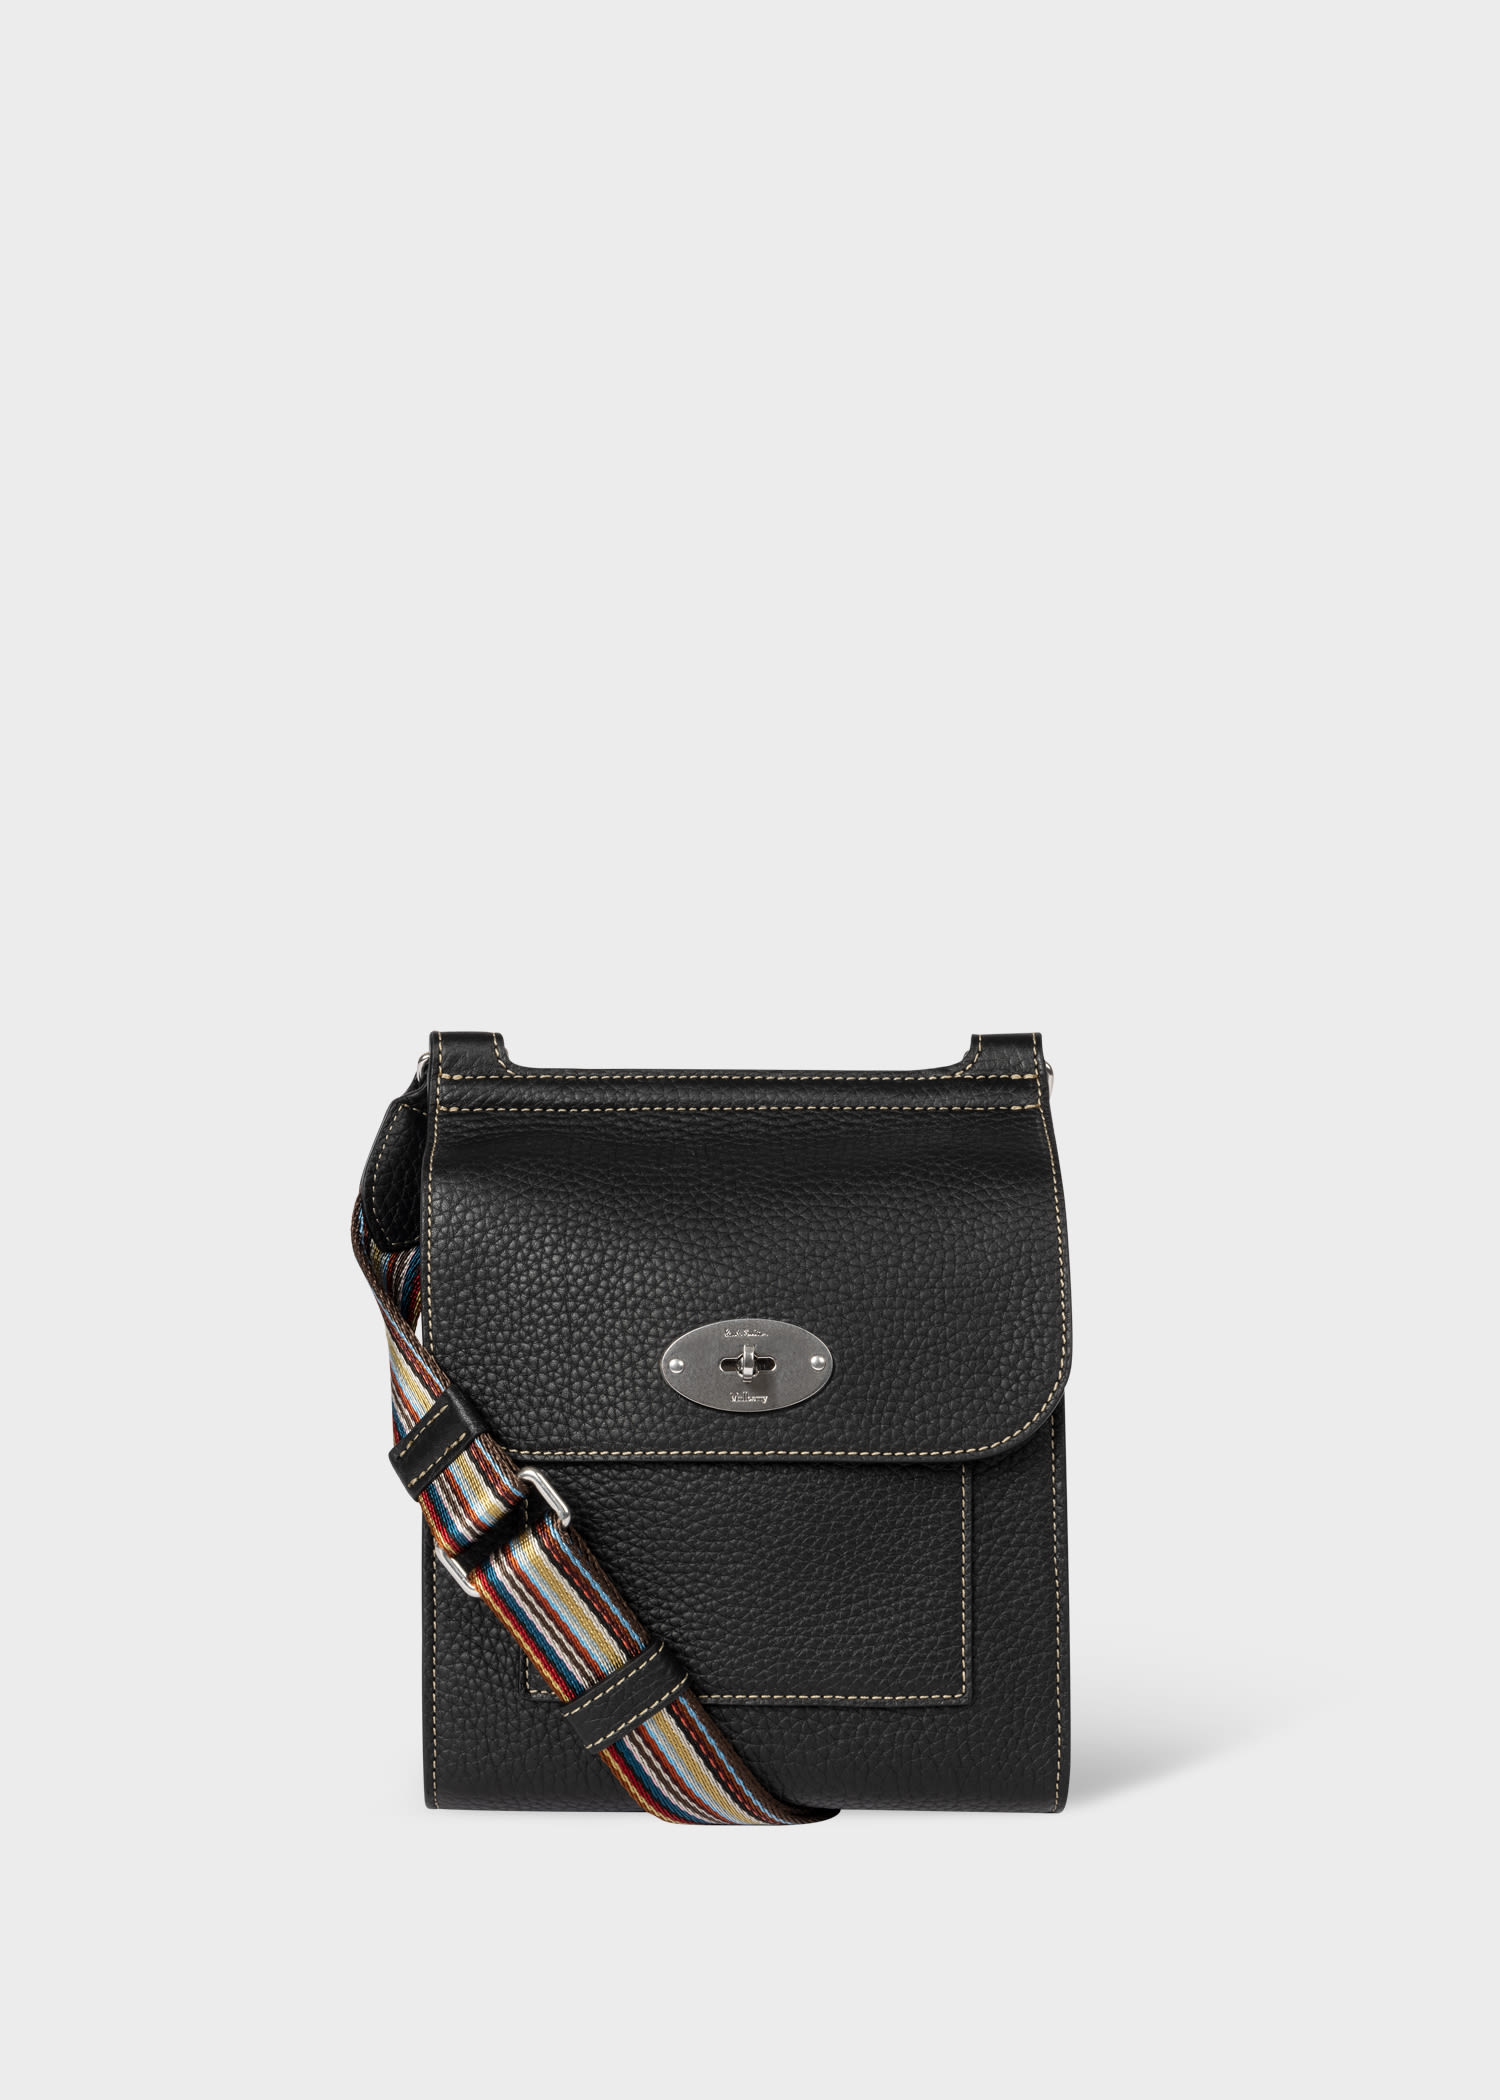 Paul Smith X Mulberry Mini Leather Anthony Cross-body Bag in Black